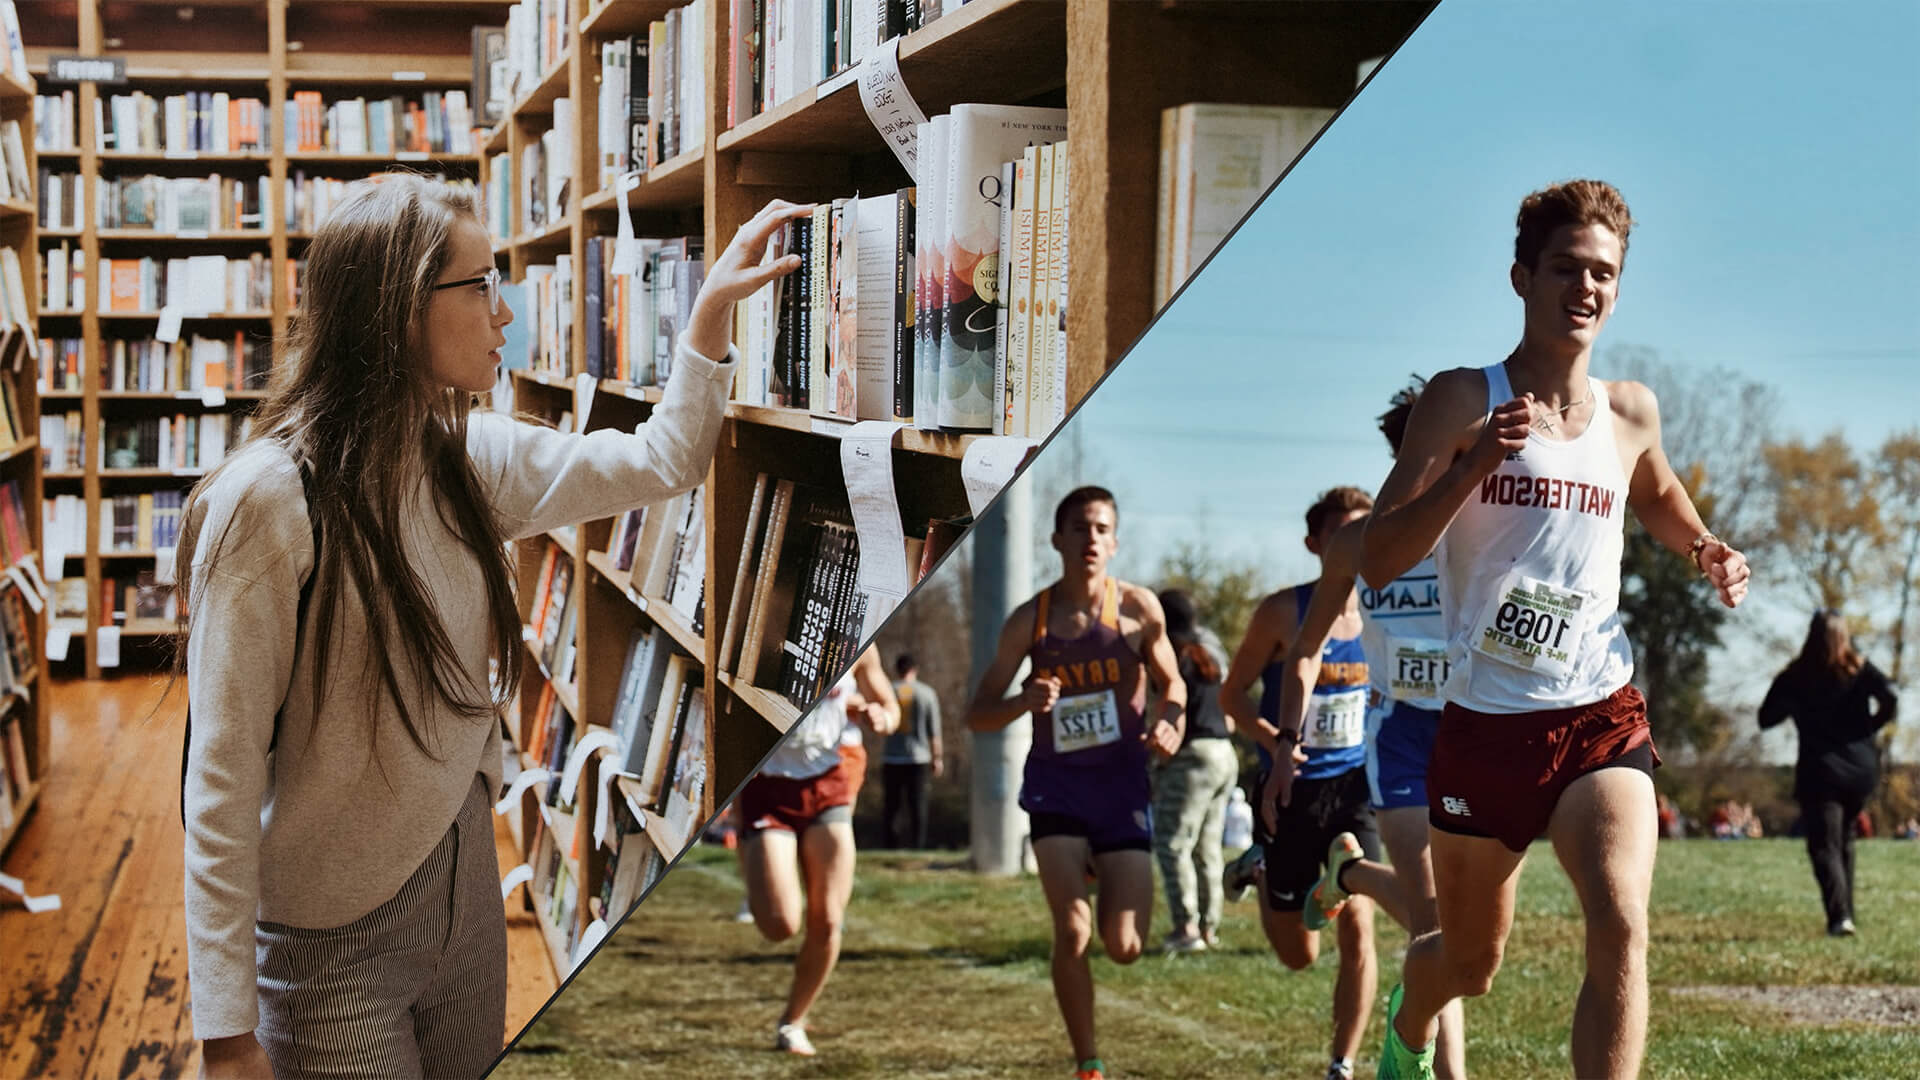 A collage with two images side-to-side showing a girl searching for books in library shelves and athletes in running competition, used here as a metaphor that reading books is equivalent to running faster than the rest.